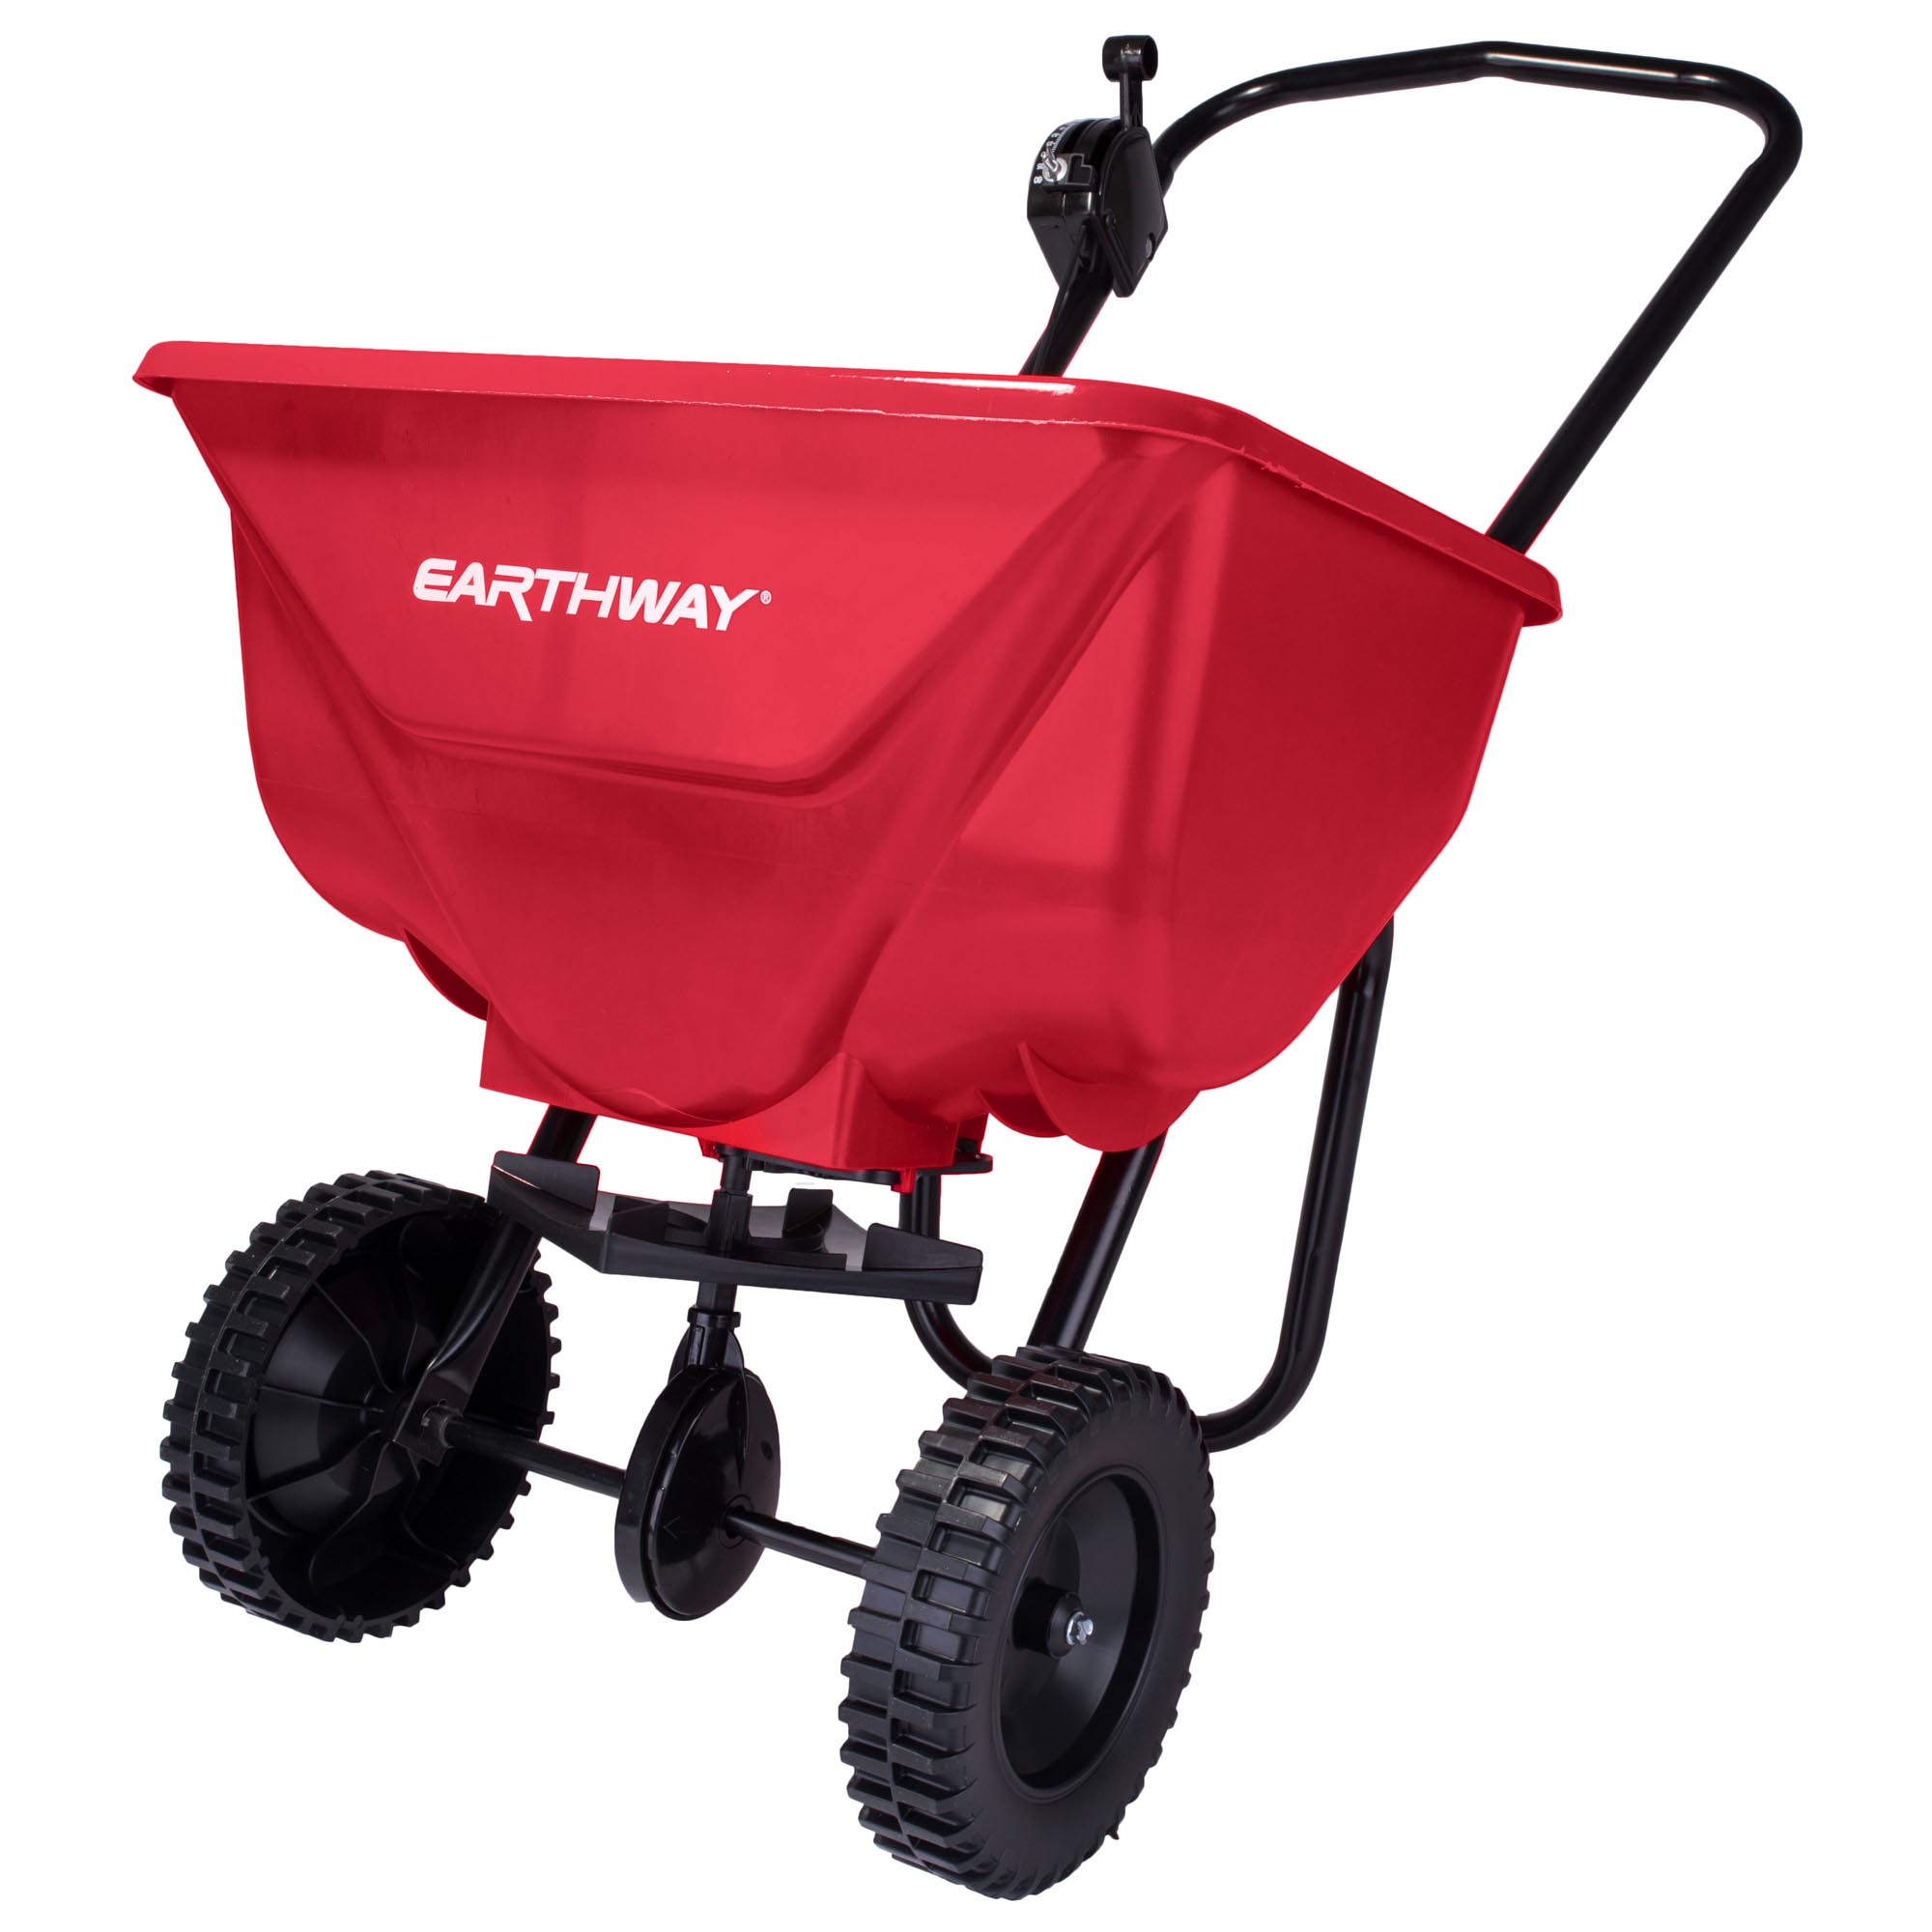 65lb Commercial Broadcast Spreader with Poly Tires